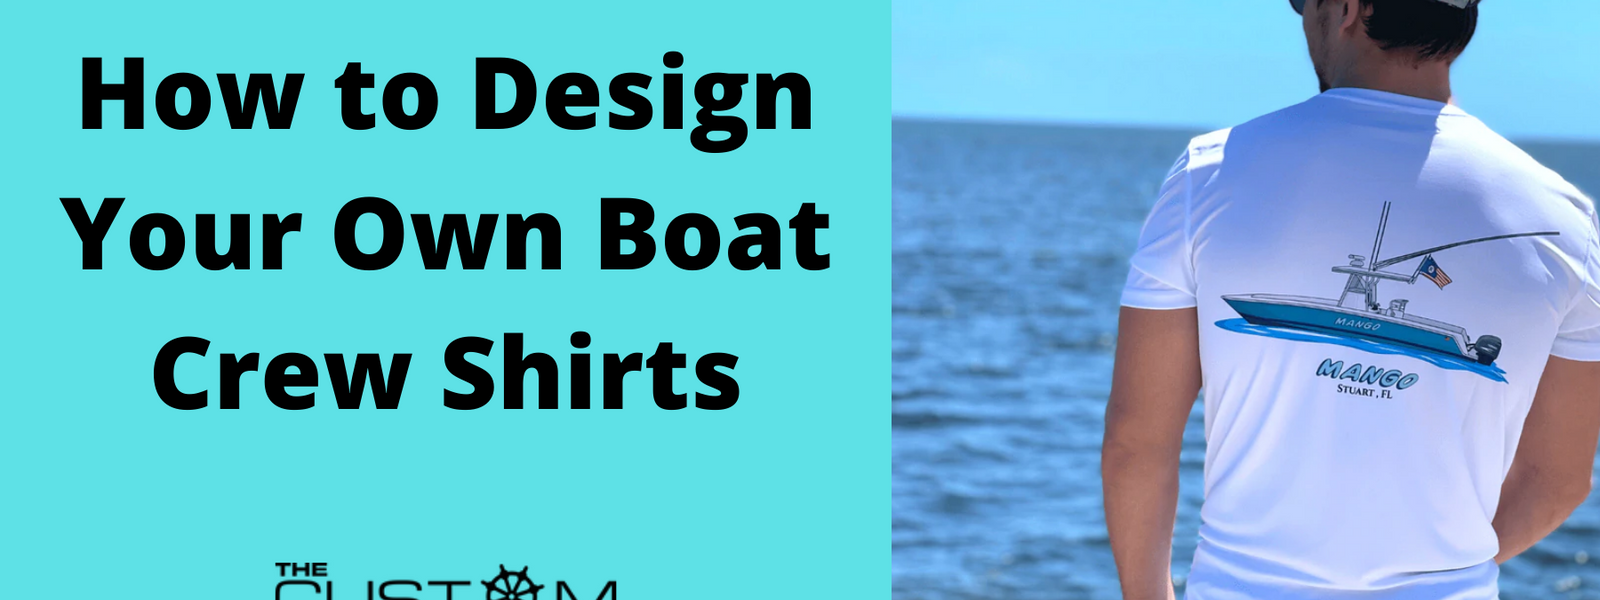 How to Design Your Own Boat Crew Shirts